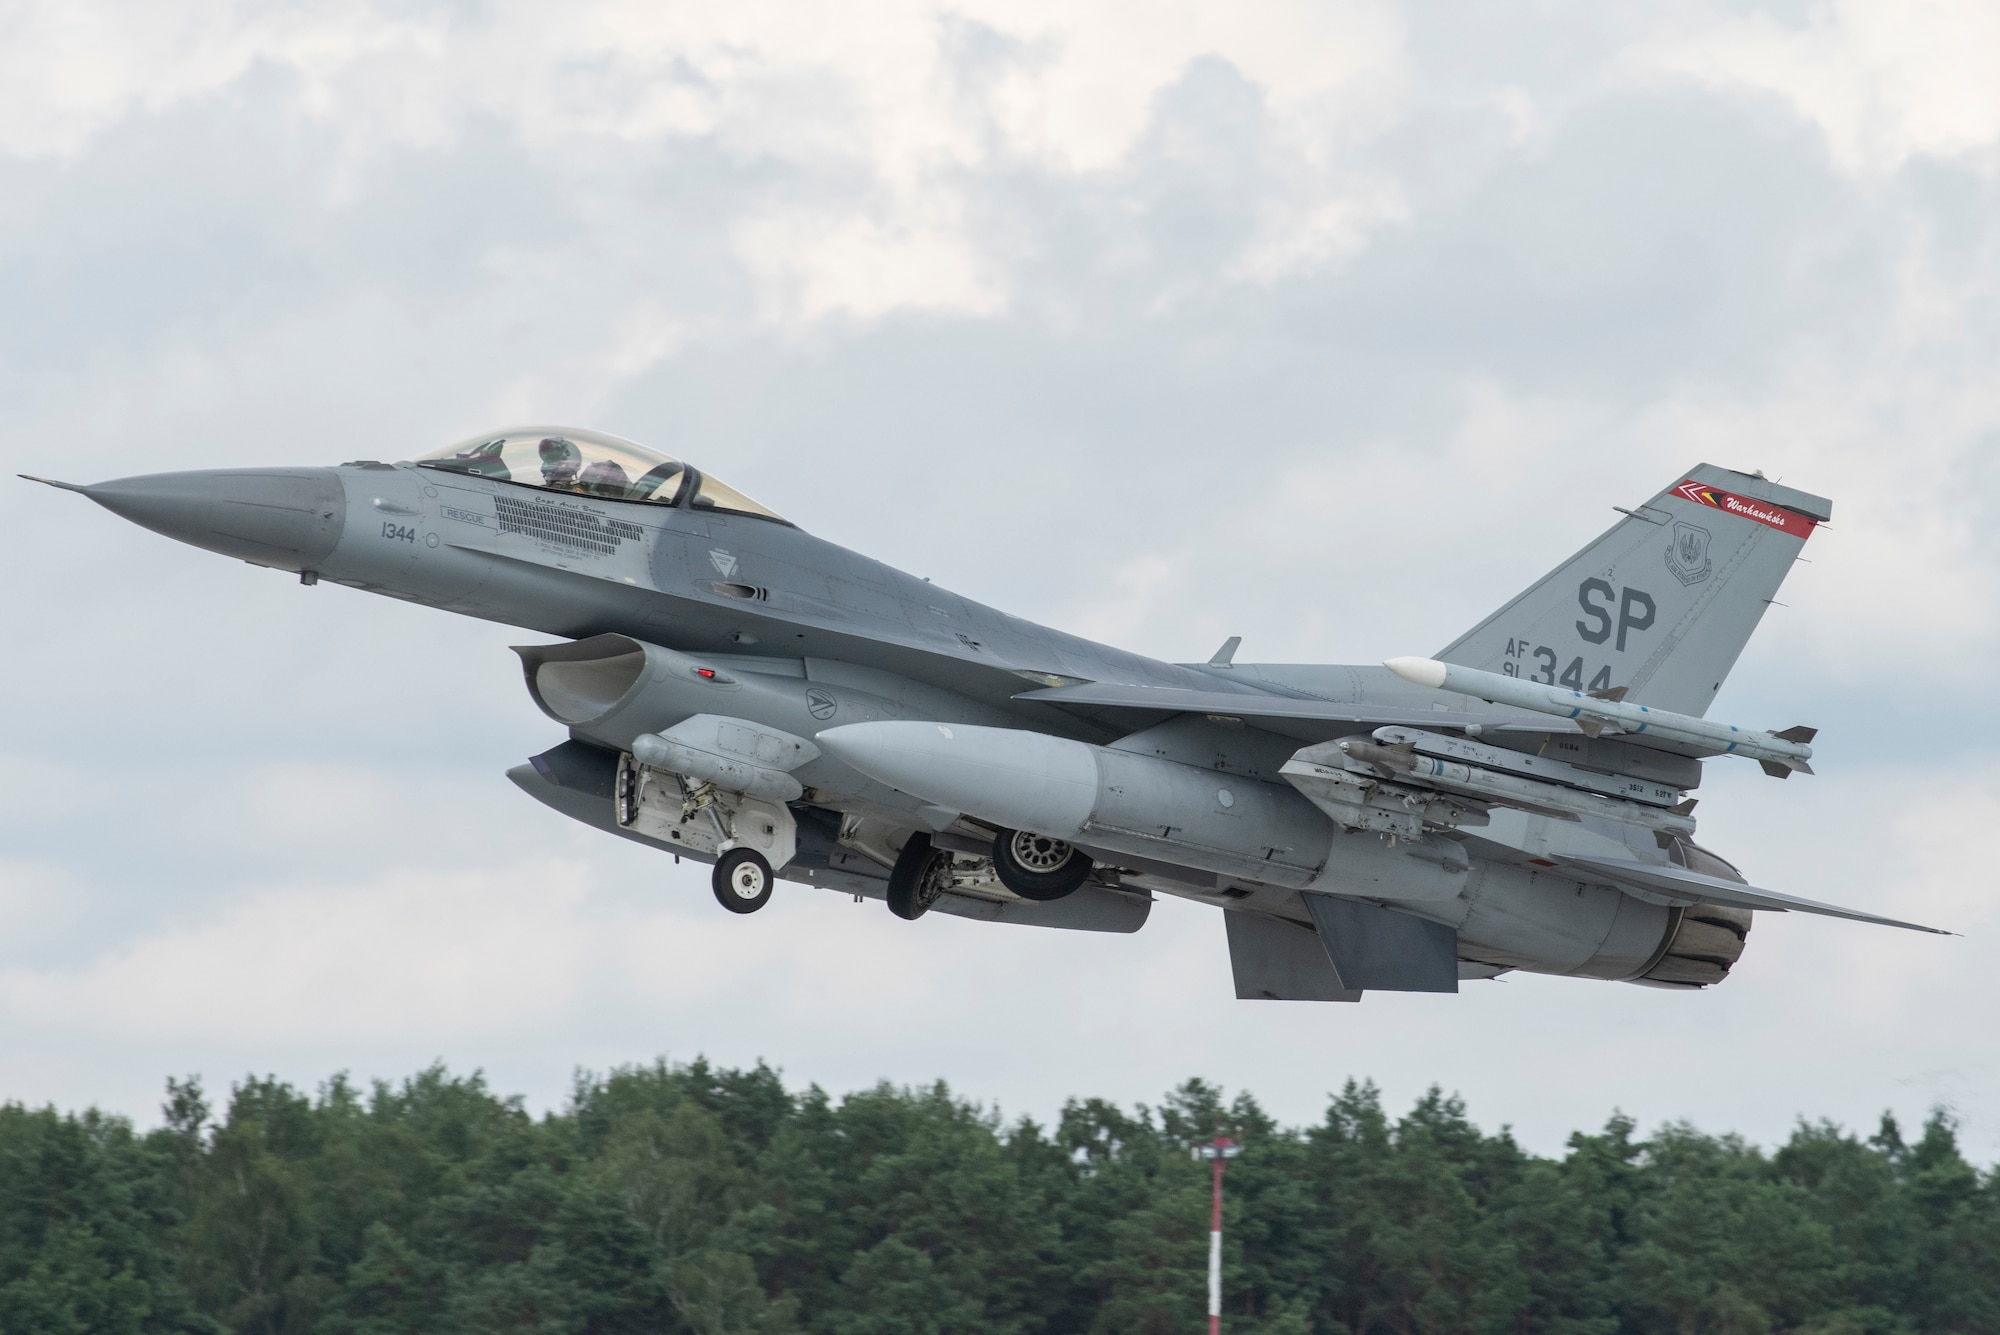 A U.S. Air Force F-16 Fighting Falcon, assigned to the 480th Expeditionary Fighter Squadron, takes off at Łask Air Base, Poland during Aviation Detachment Rotation 21.3, August 2, 2021. The ADR focuses on maintaining joint readiness while enhancing partner interoperability. (U.S. Air Force photo by Tech. Sgt. Anthony Plyler)